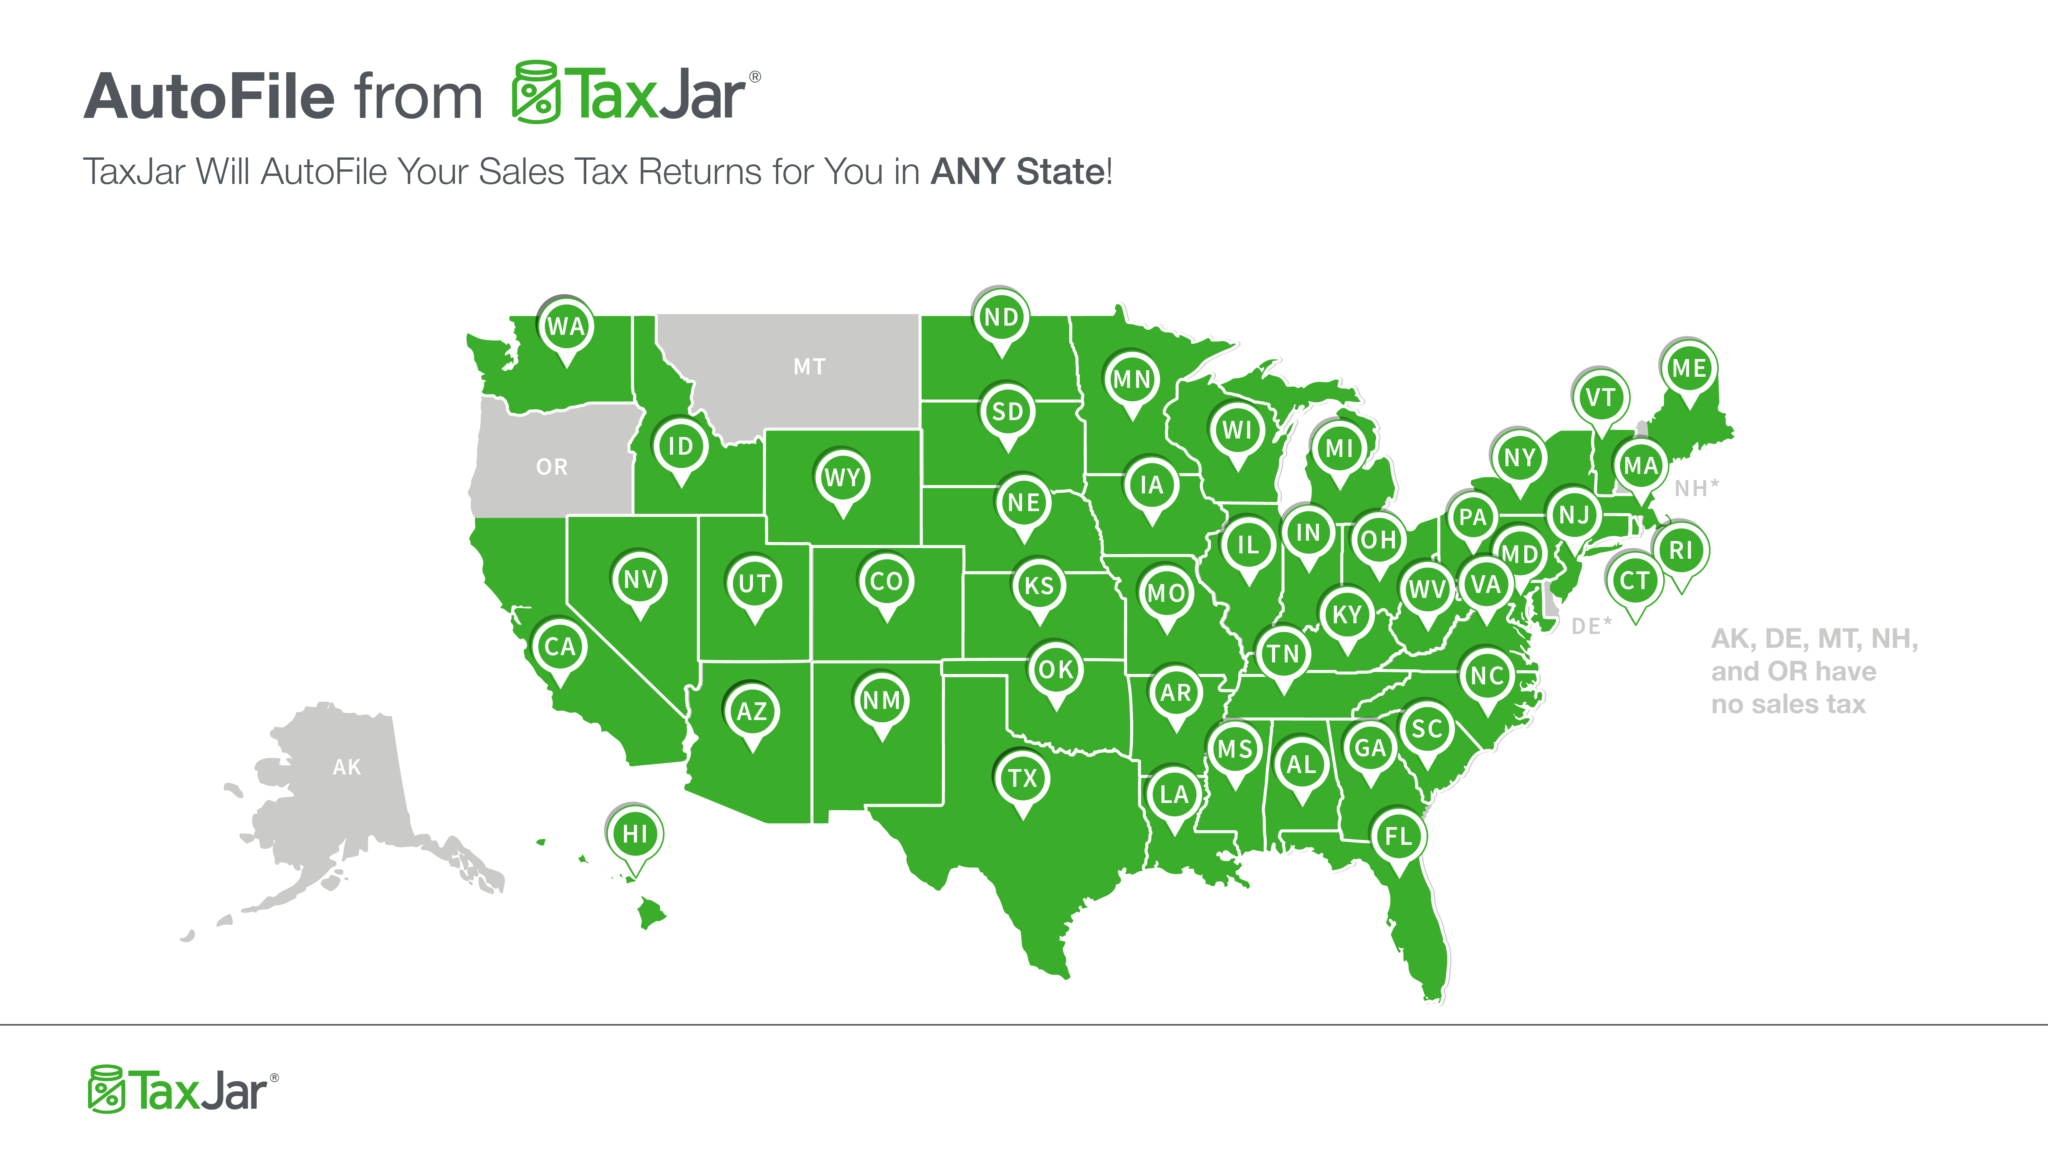 Automatically File your Sales Tax Returns in Every State with TaxJar AutoFile